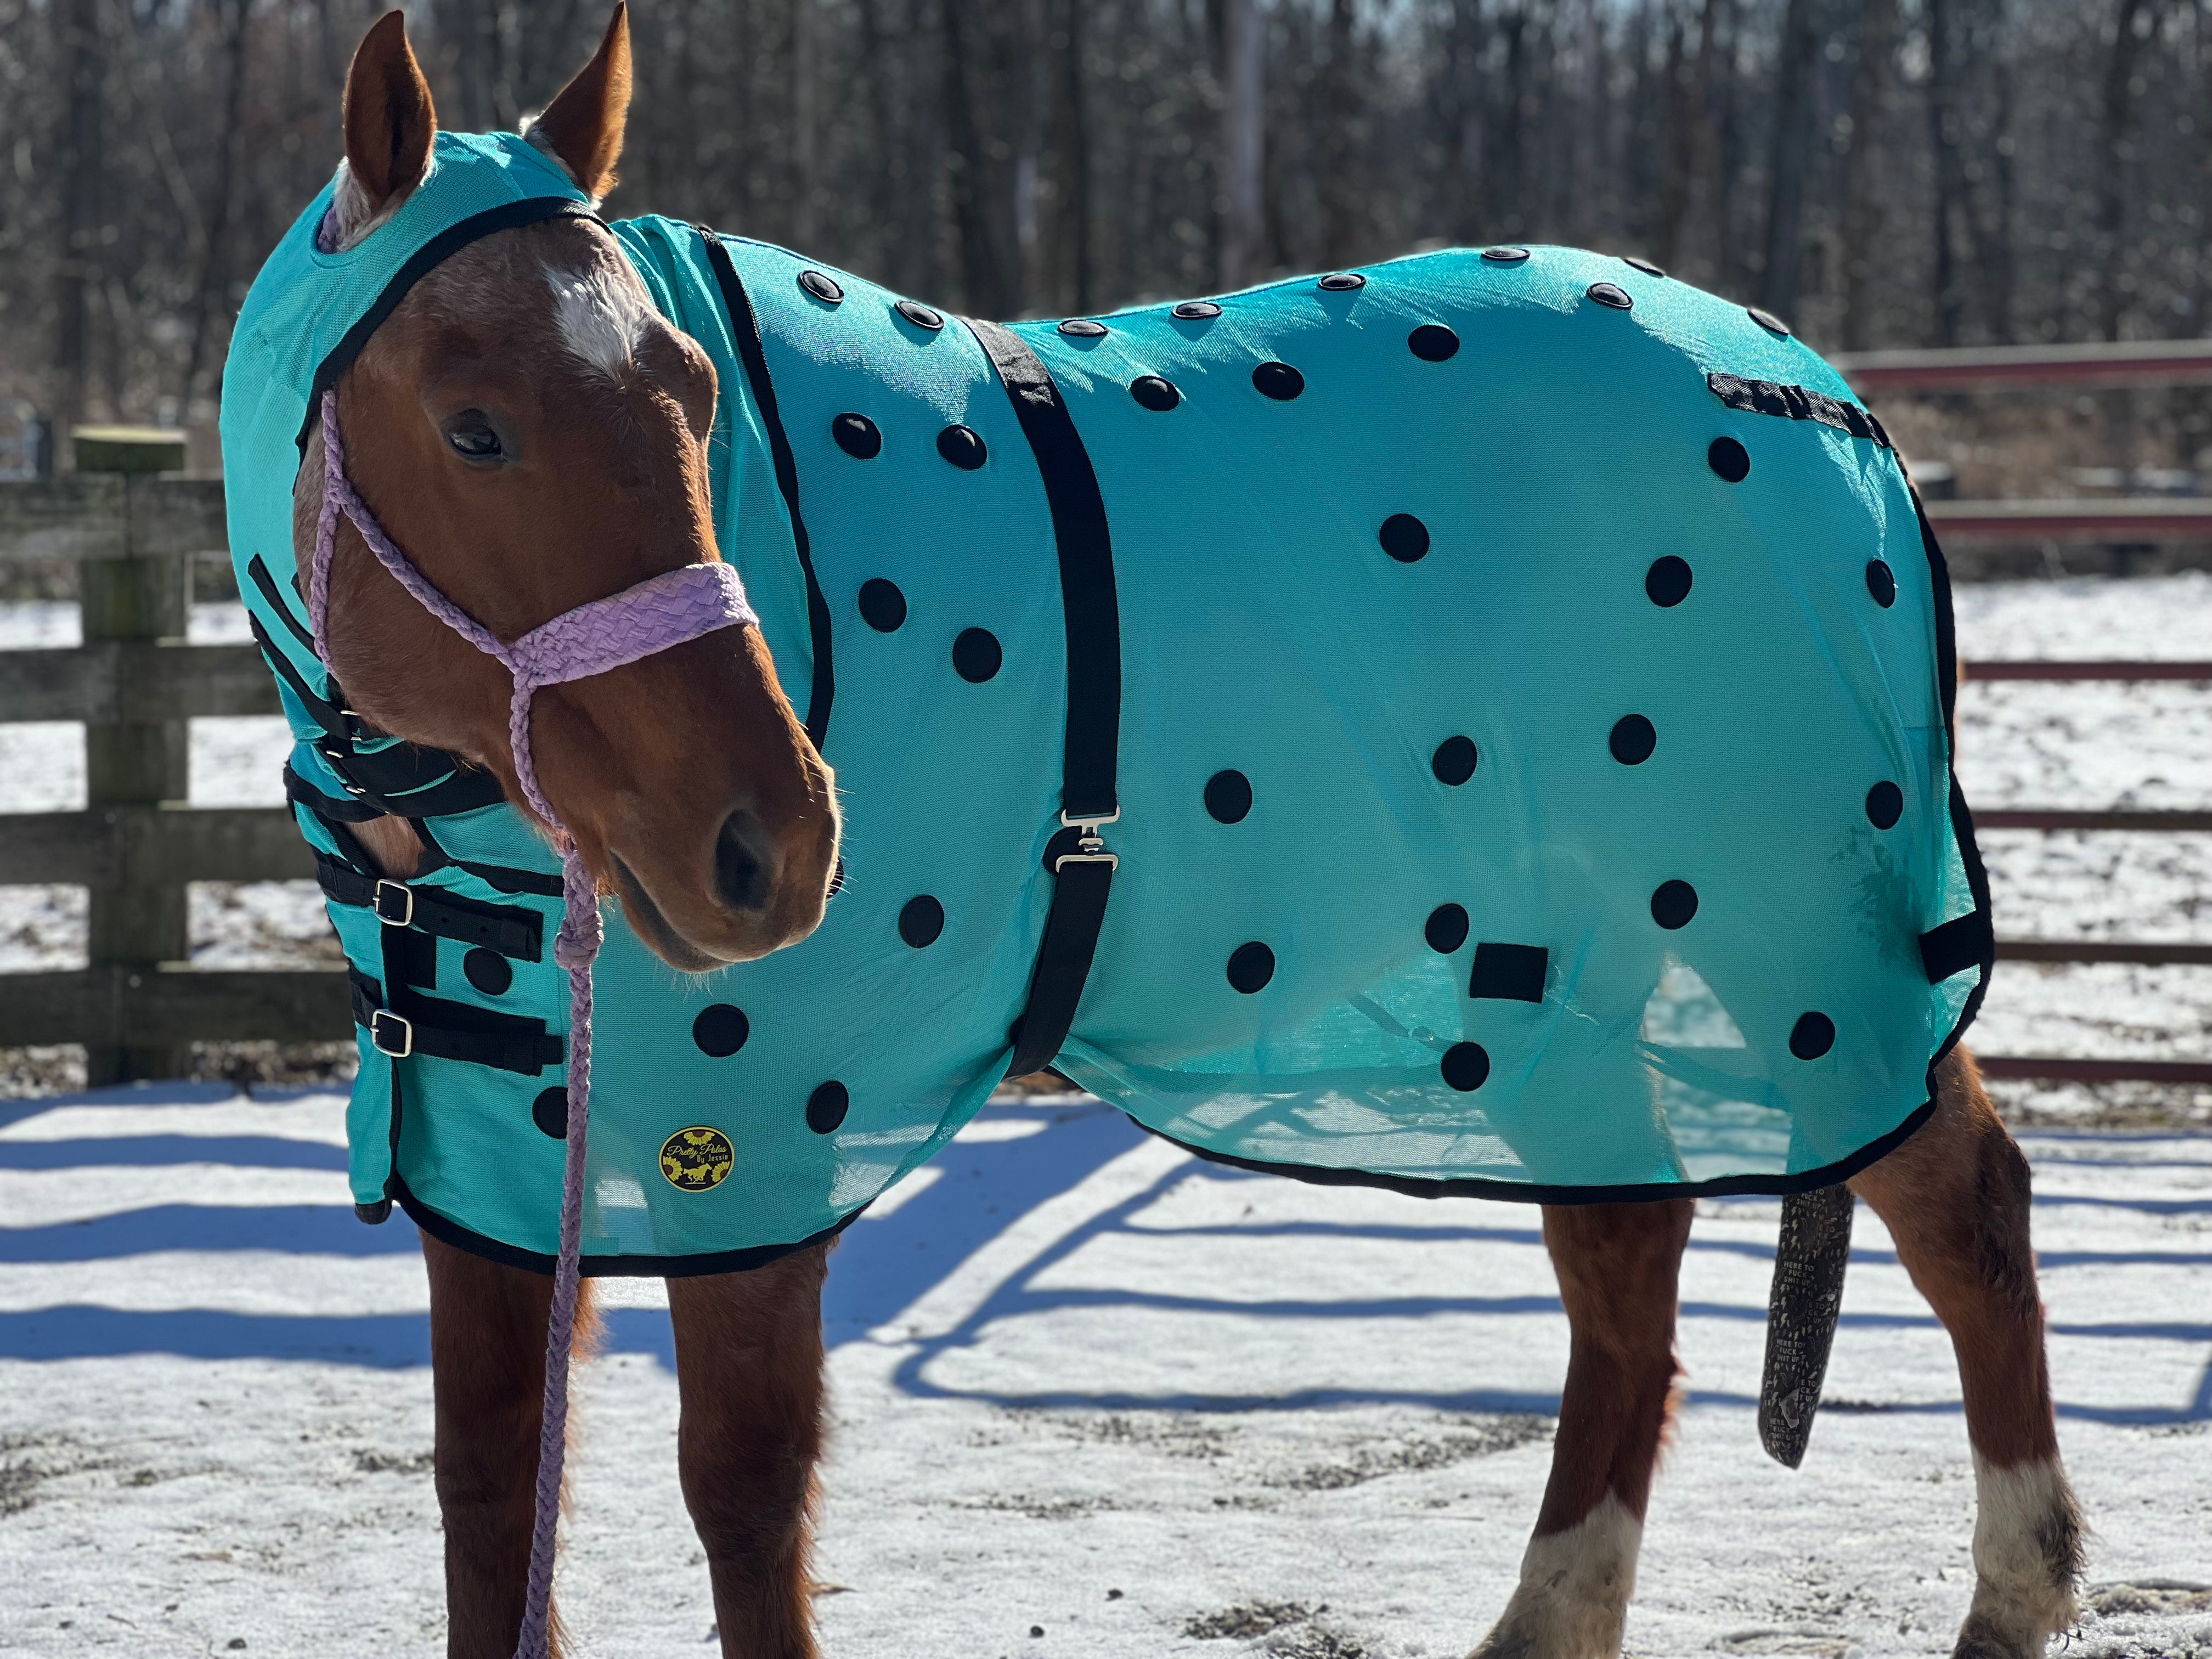 Magnetic Sheets Pretty Polos By Jessie & Lopin' With Grace Tack LLC